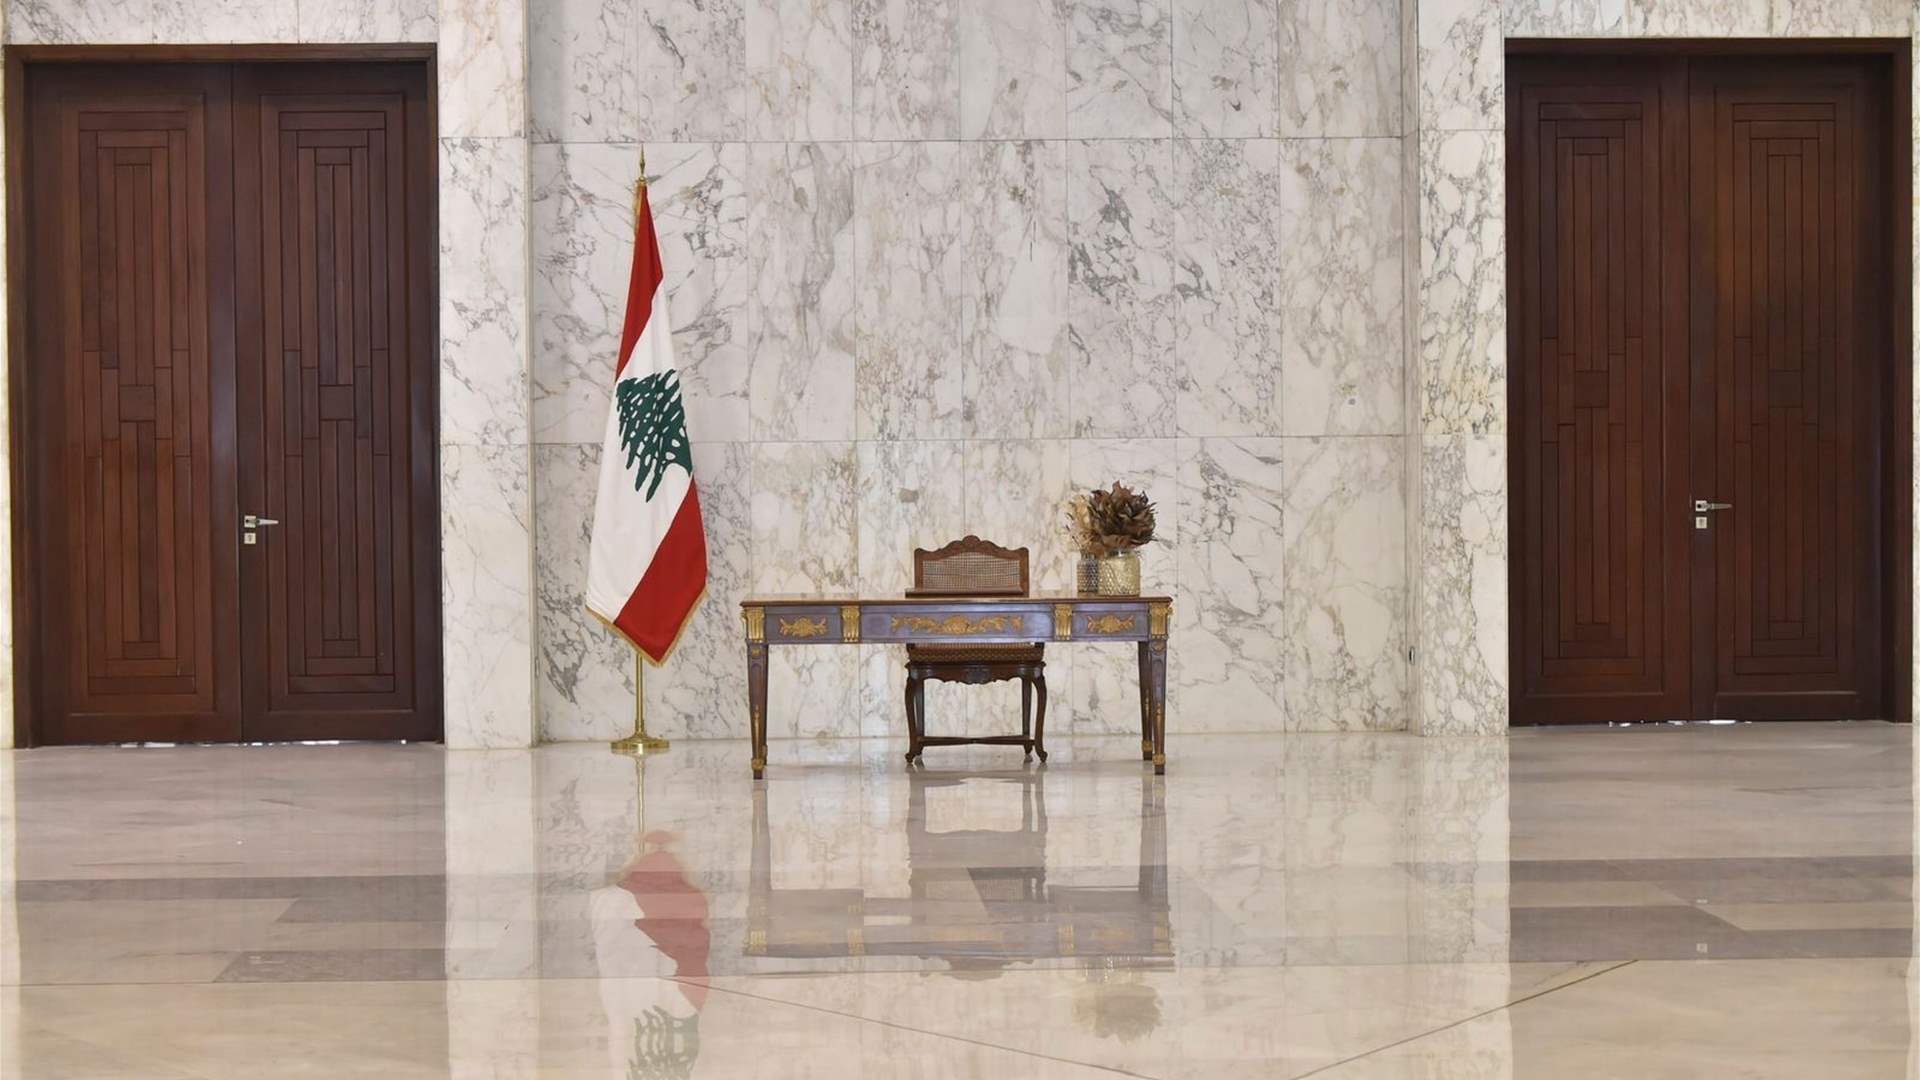 Presidential election deadlock in Lebanon: The quest for a consensual option